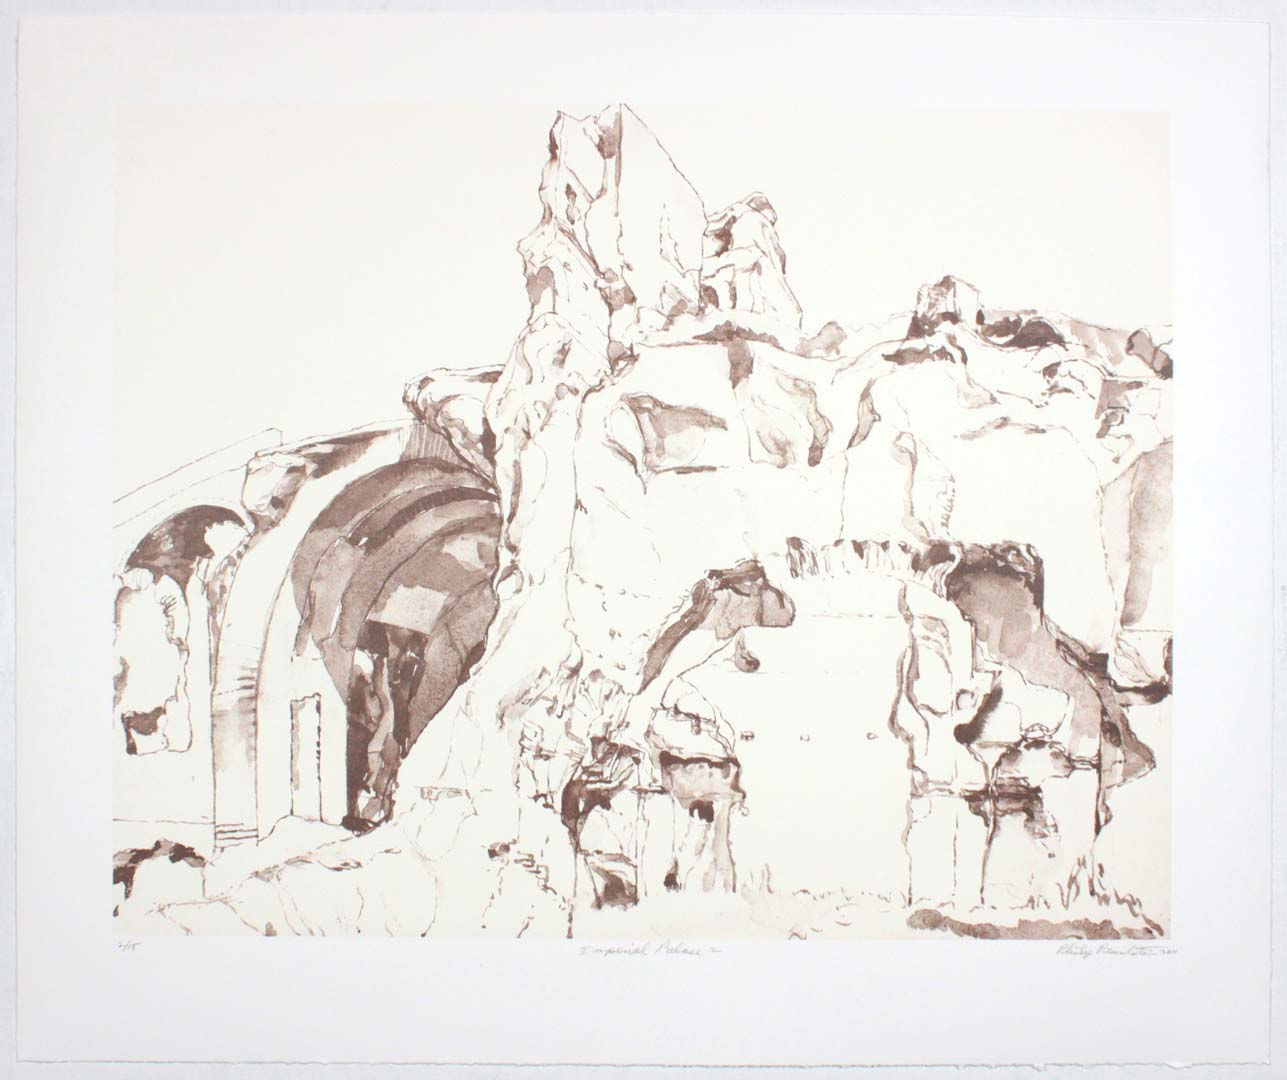 2011 Imperial Palace #2 Lithograph on Paper 20.625 x 24.625